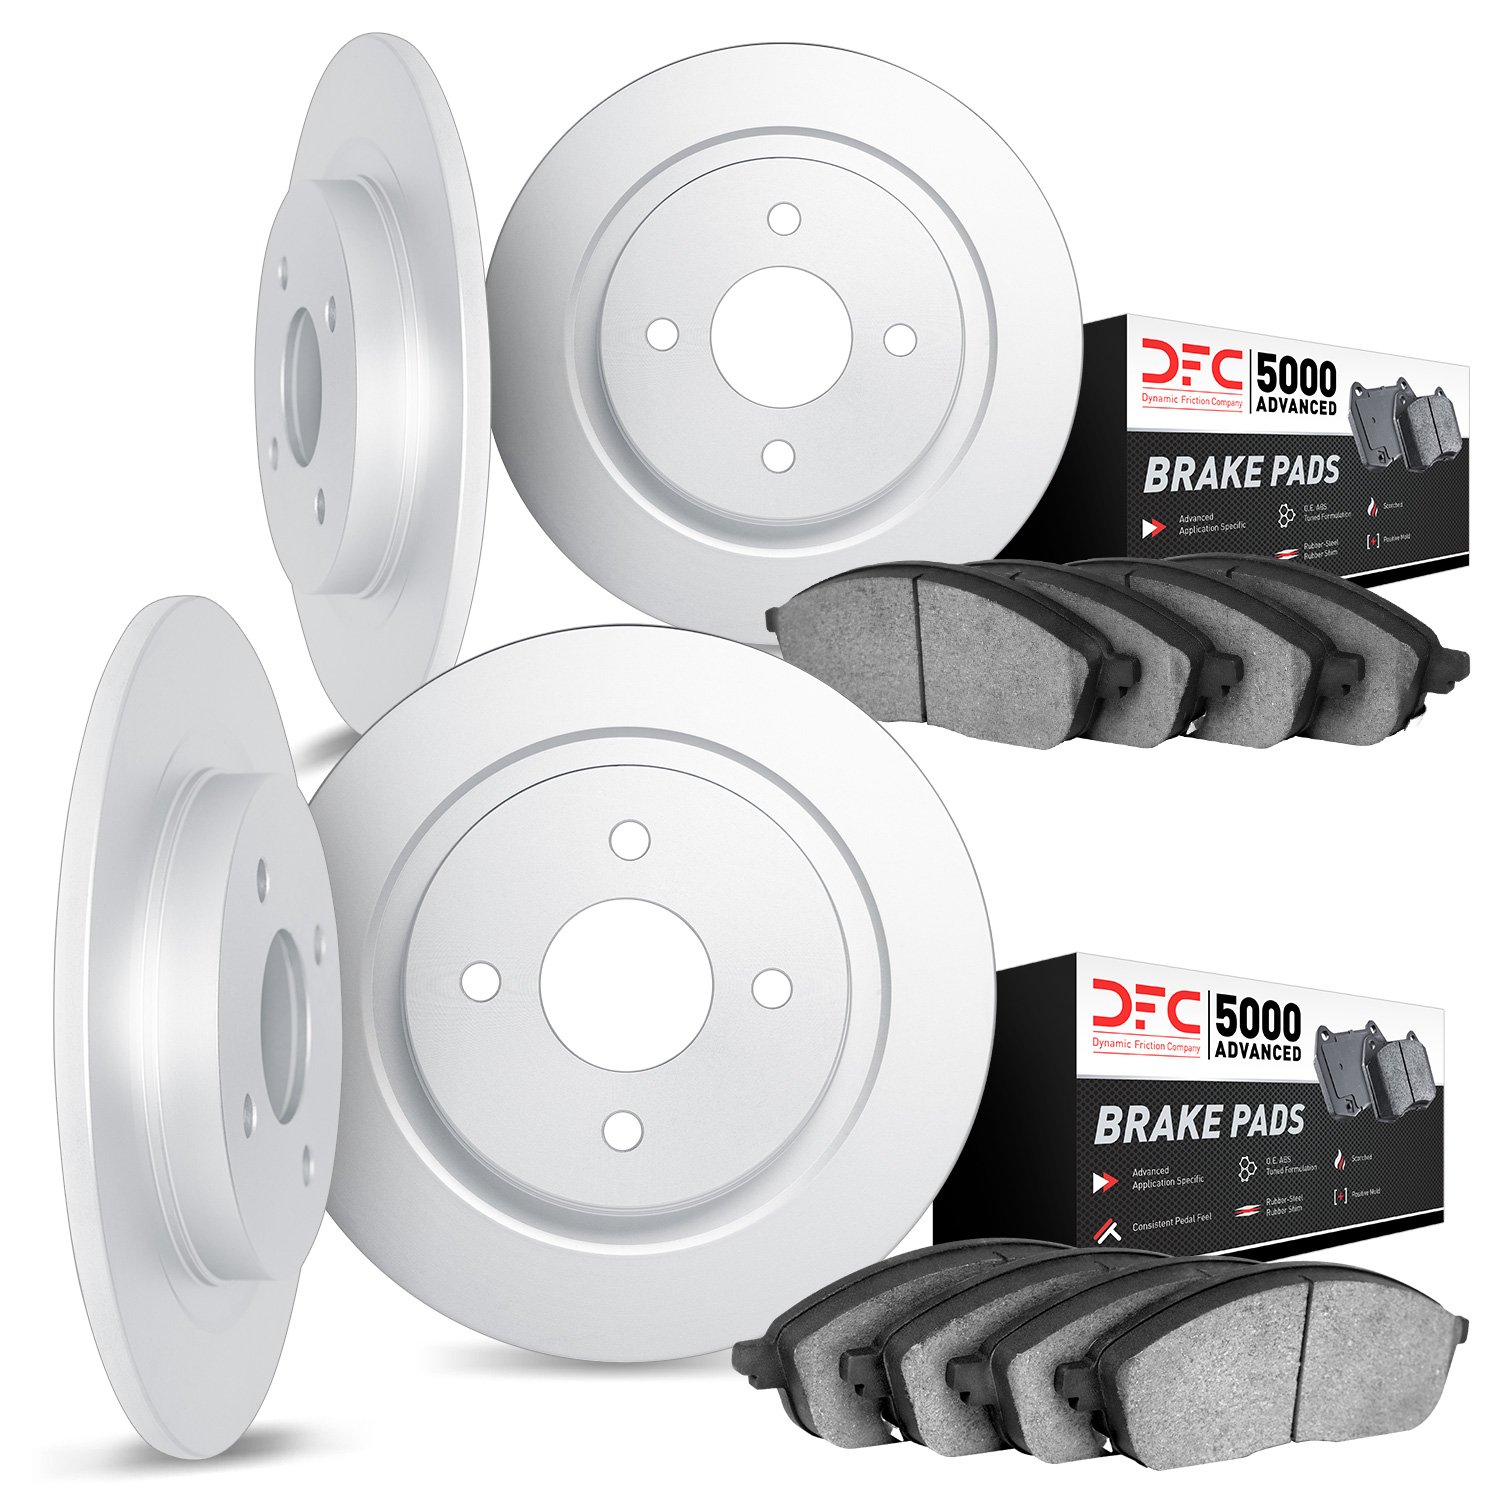 6504-28002 Brake Rotors w/5000 Advanced Brake Pads Kit, 1980-1989 Peugeot, Position: Front and Rear